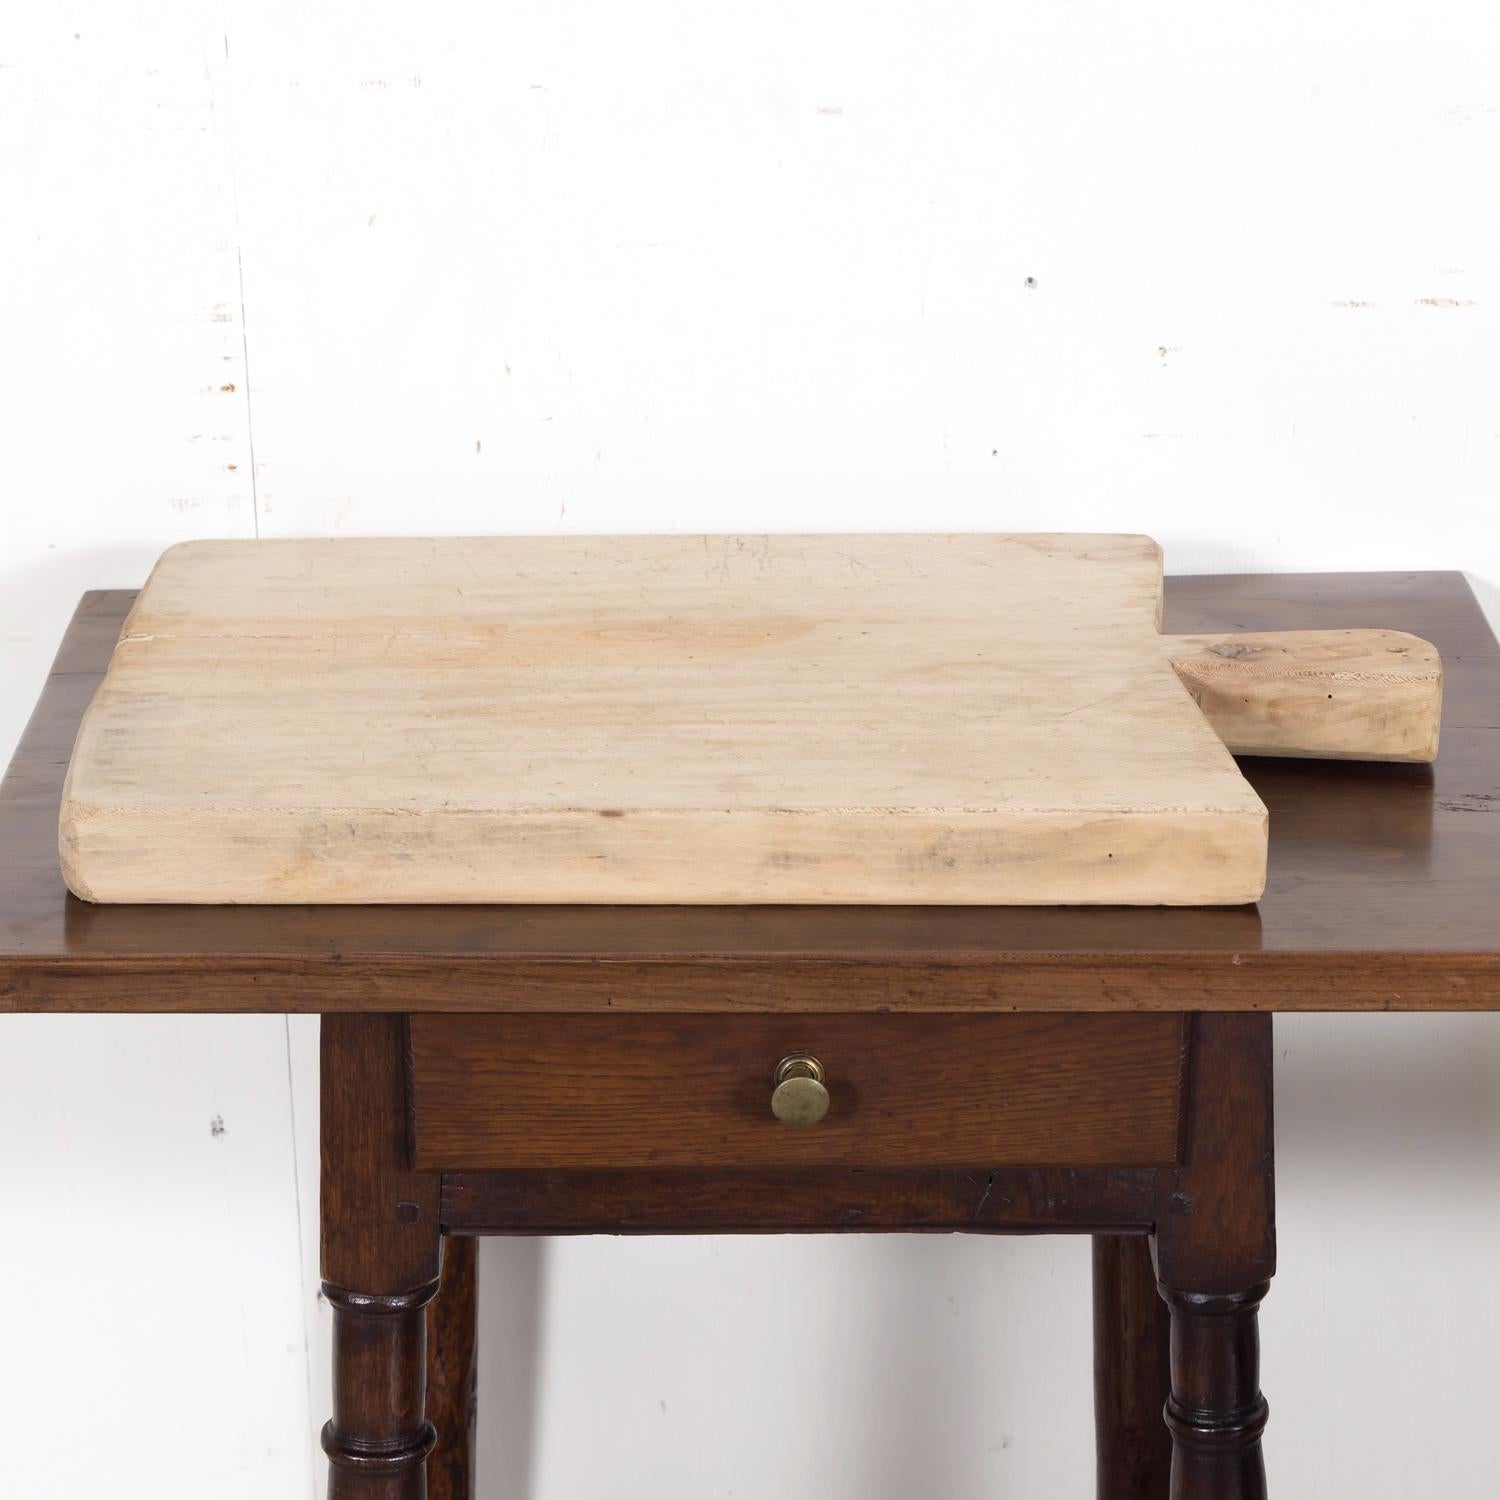 Large 19th Century Antique French Country Bleached Breadboard or Cutting Board  For Sale 4